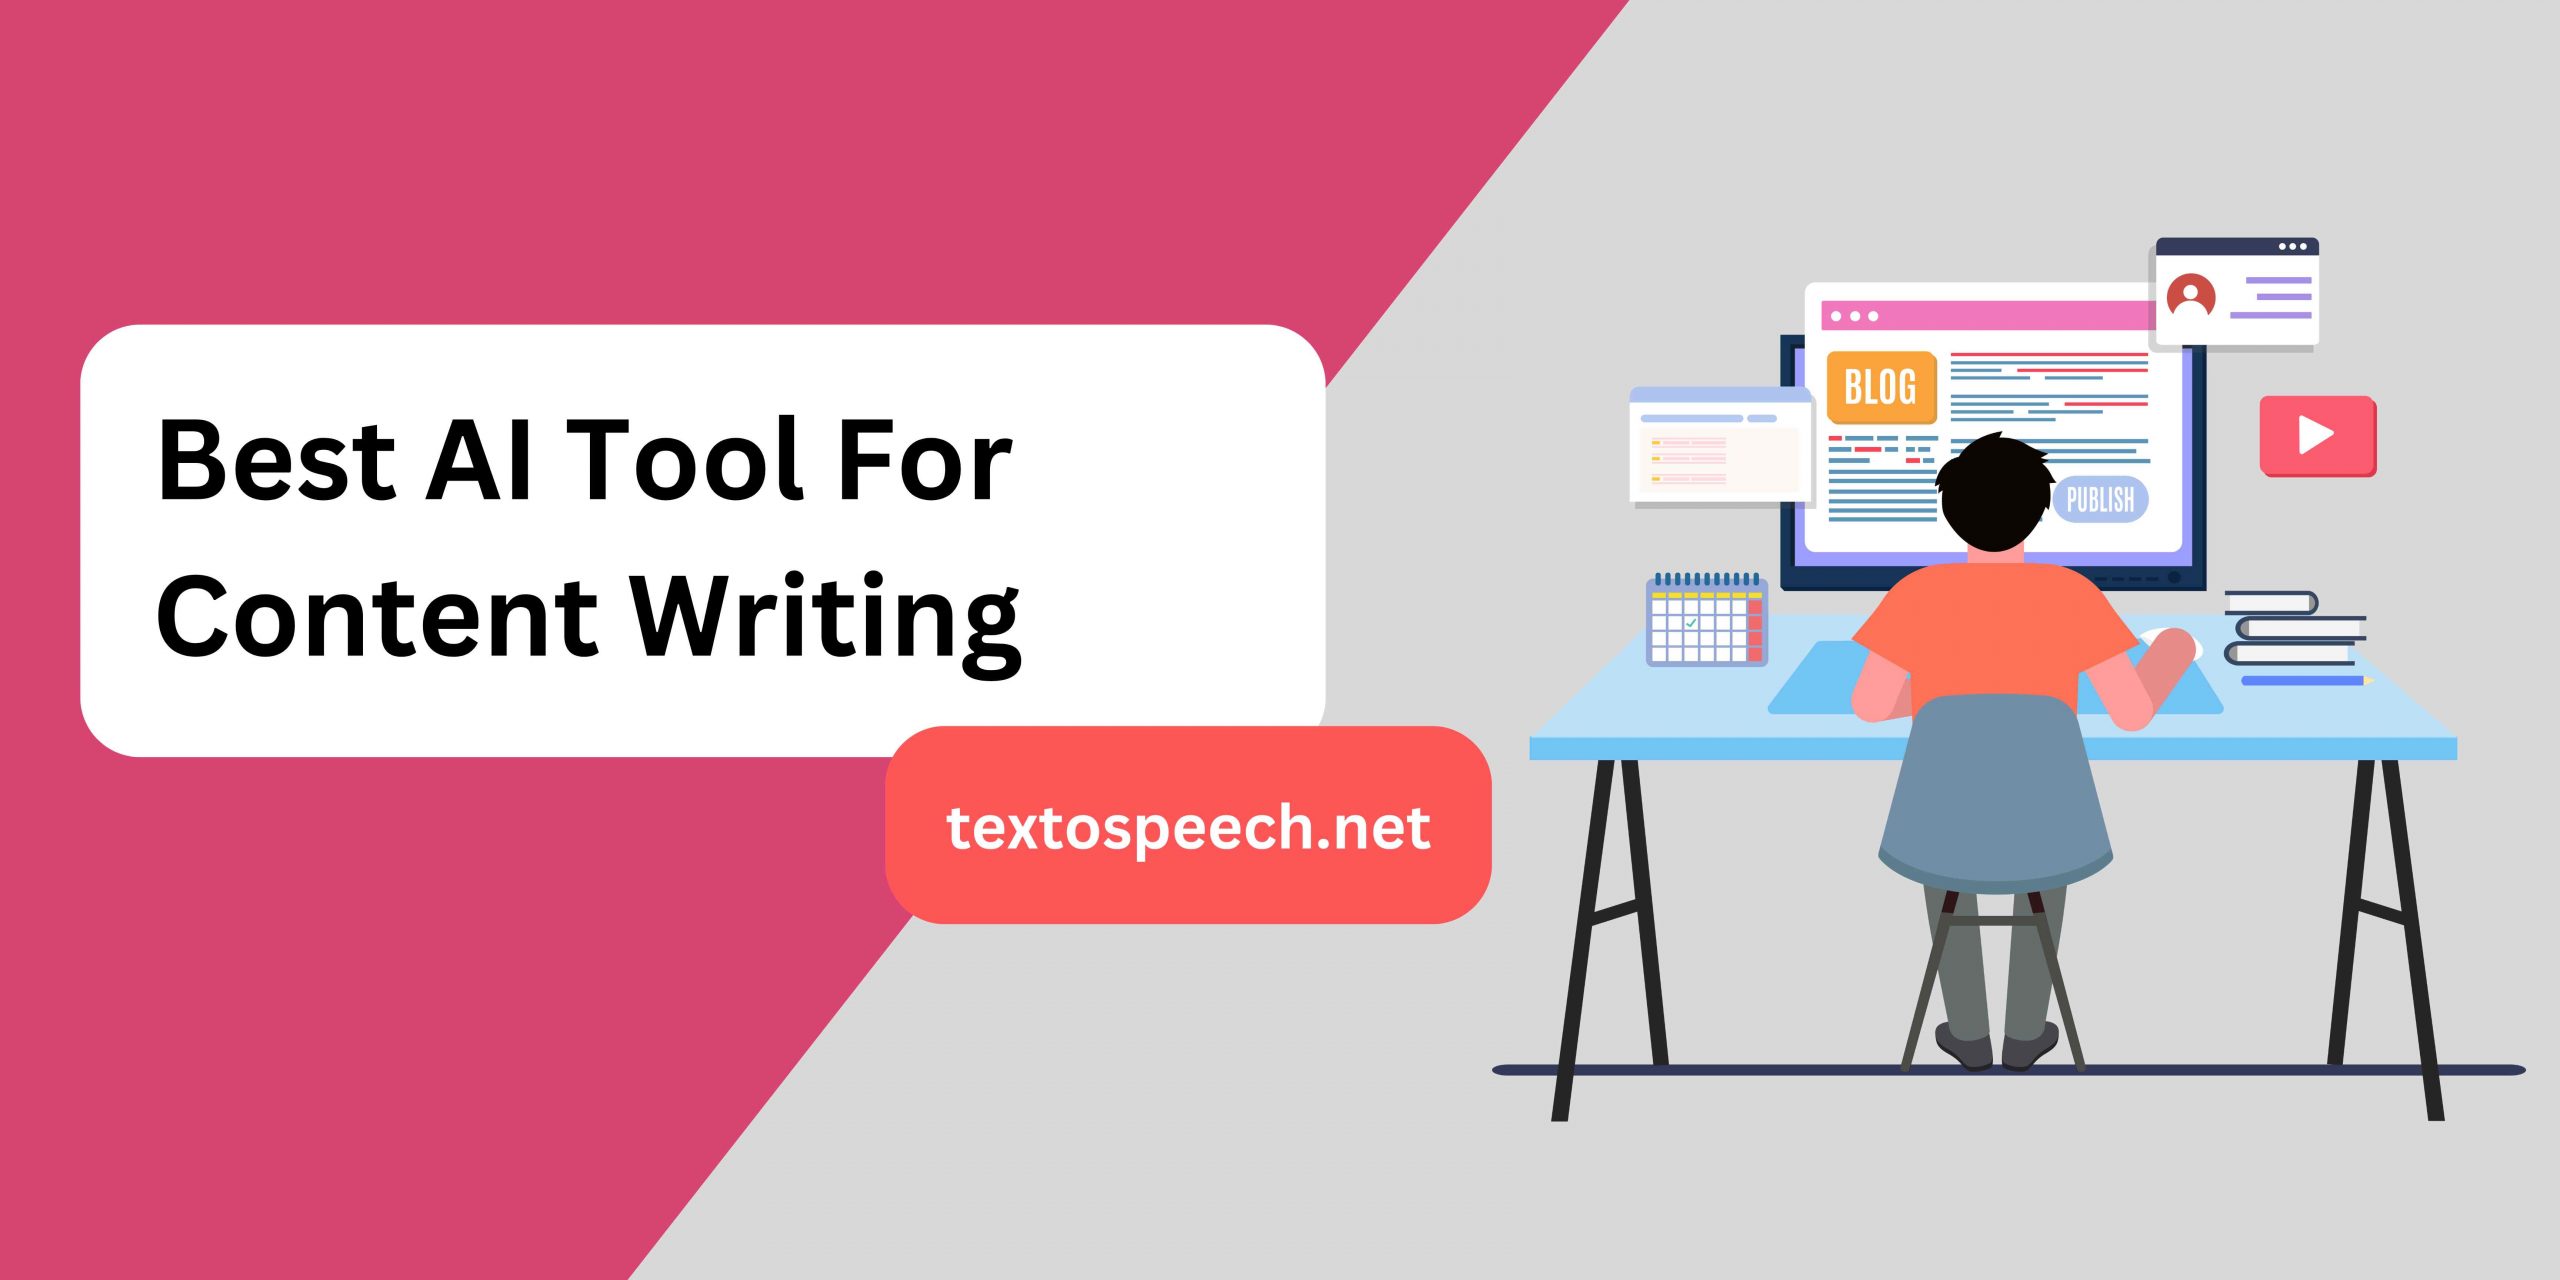 Best AI Tool For Content Writing